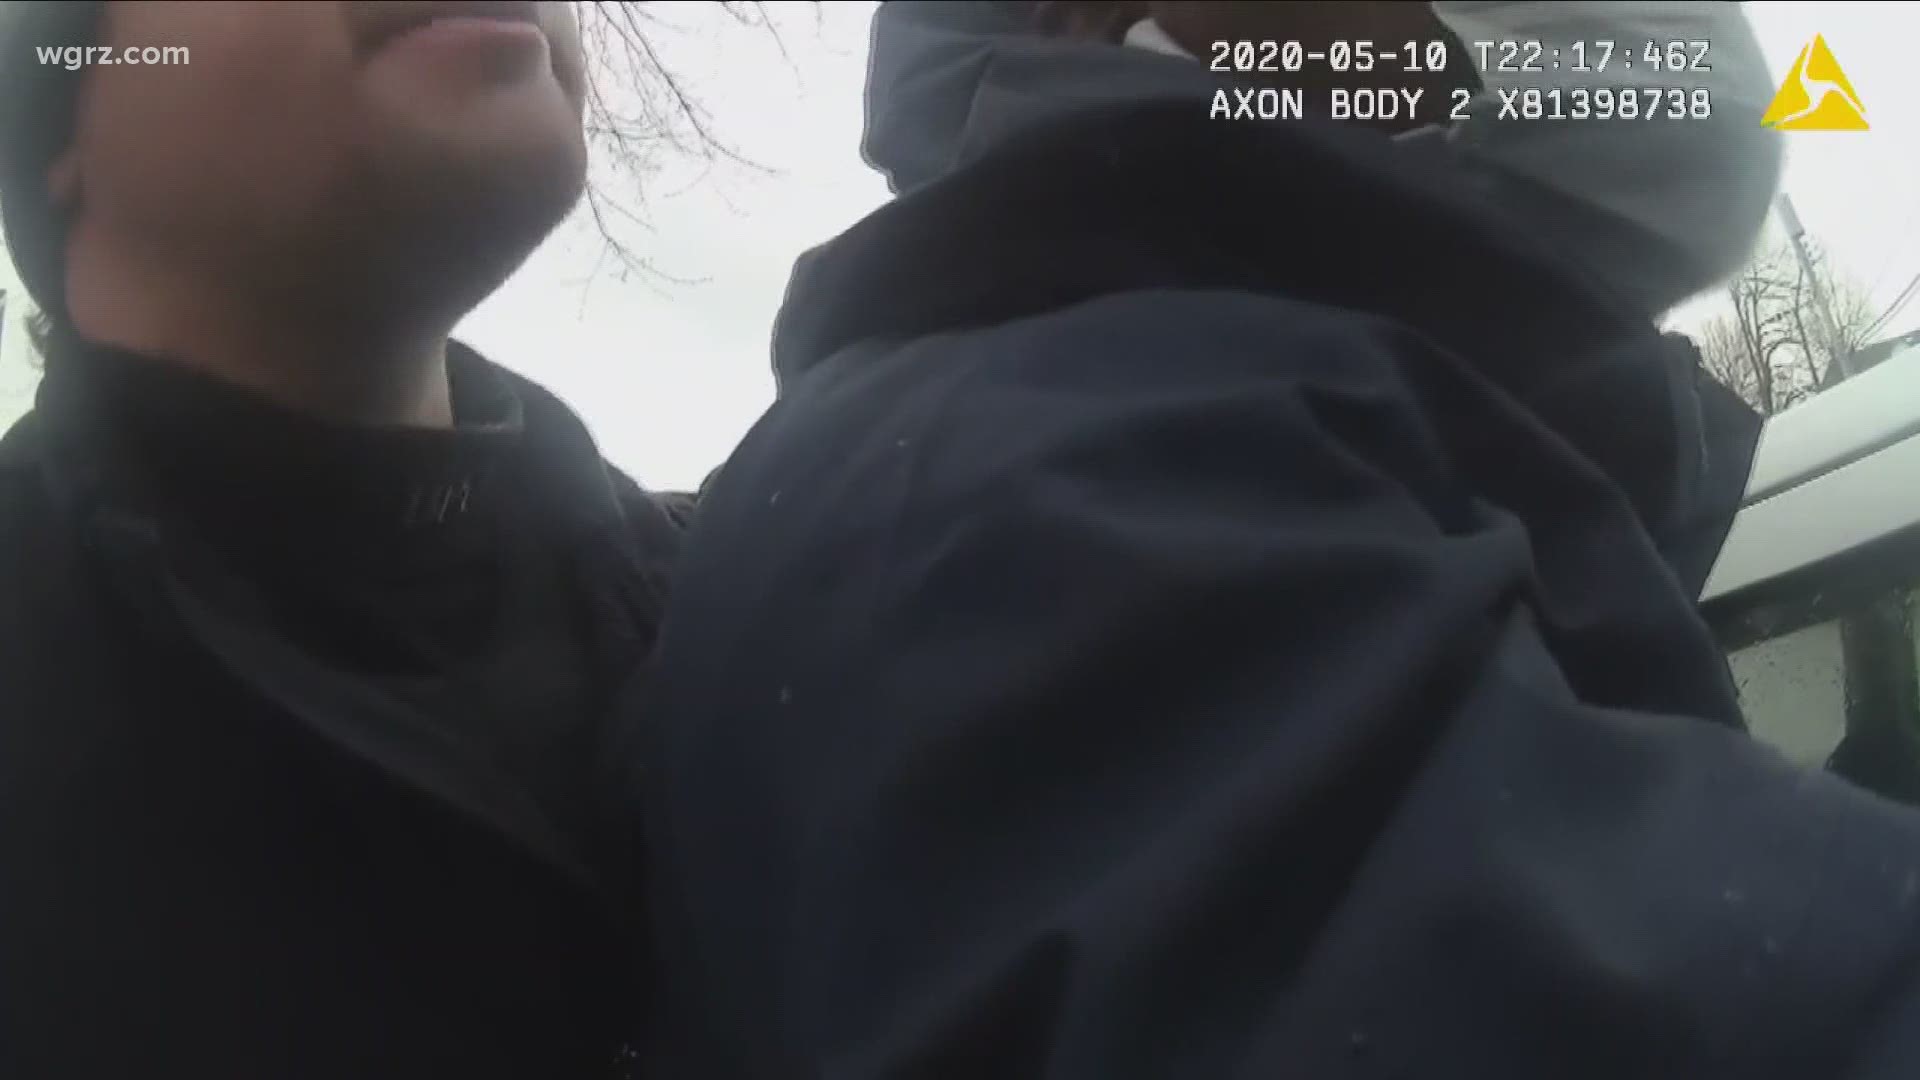 Last month this video of police punching a Buffalo man in the head during an arrest had many outraged across the city. Now, it's leading to a lawsuit.